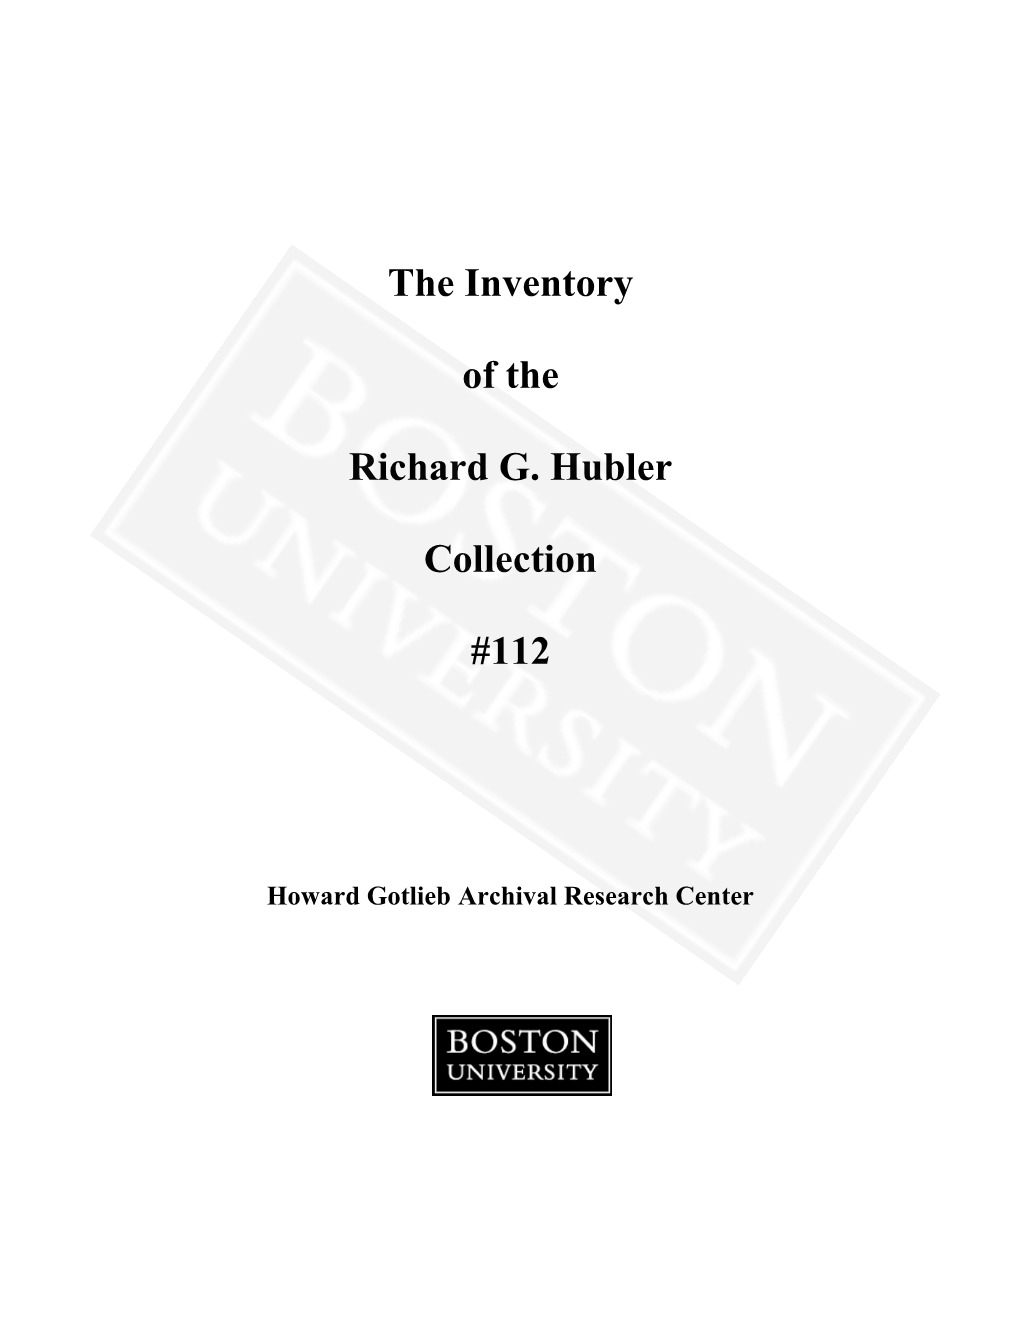 The Inventory of the Richard G. Hubler Collection #112